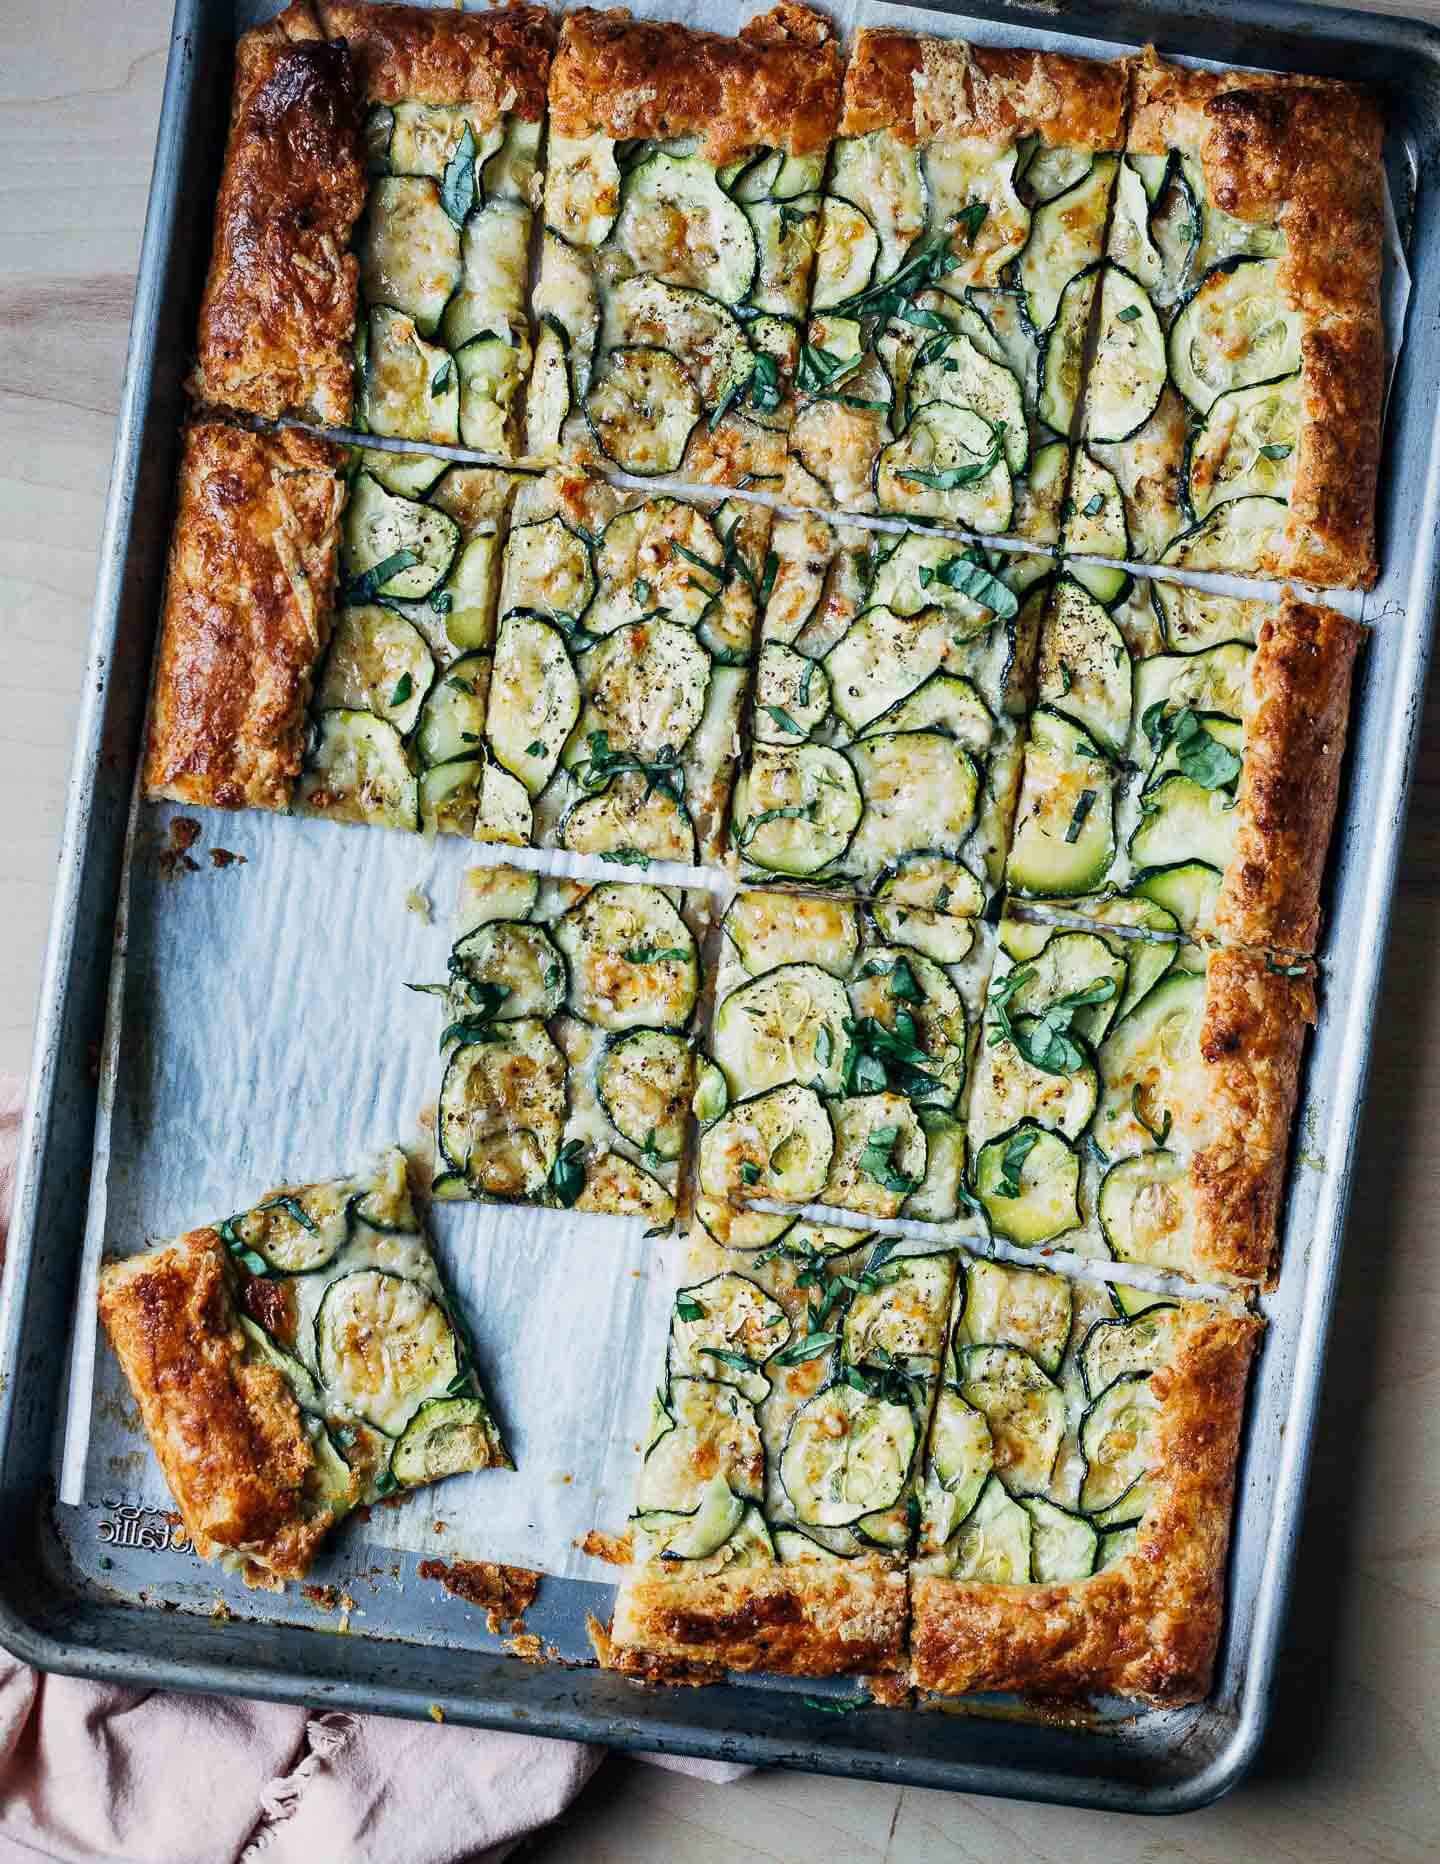 A zucchini tart on a baking sheet with several servings sliced.